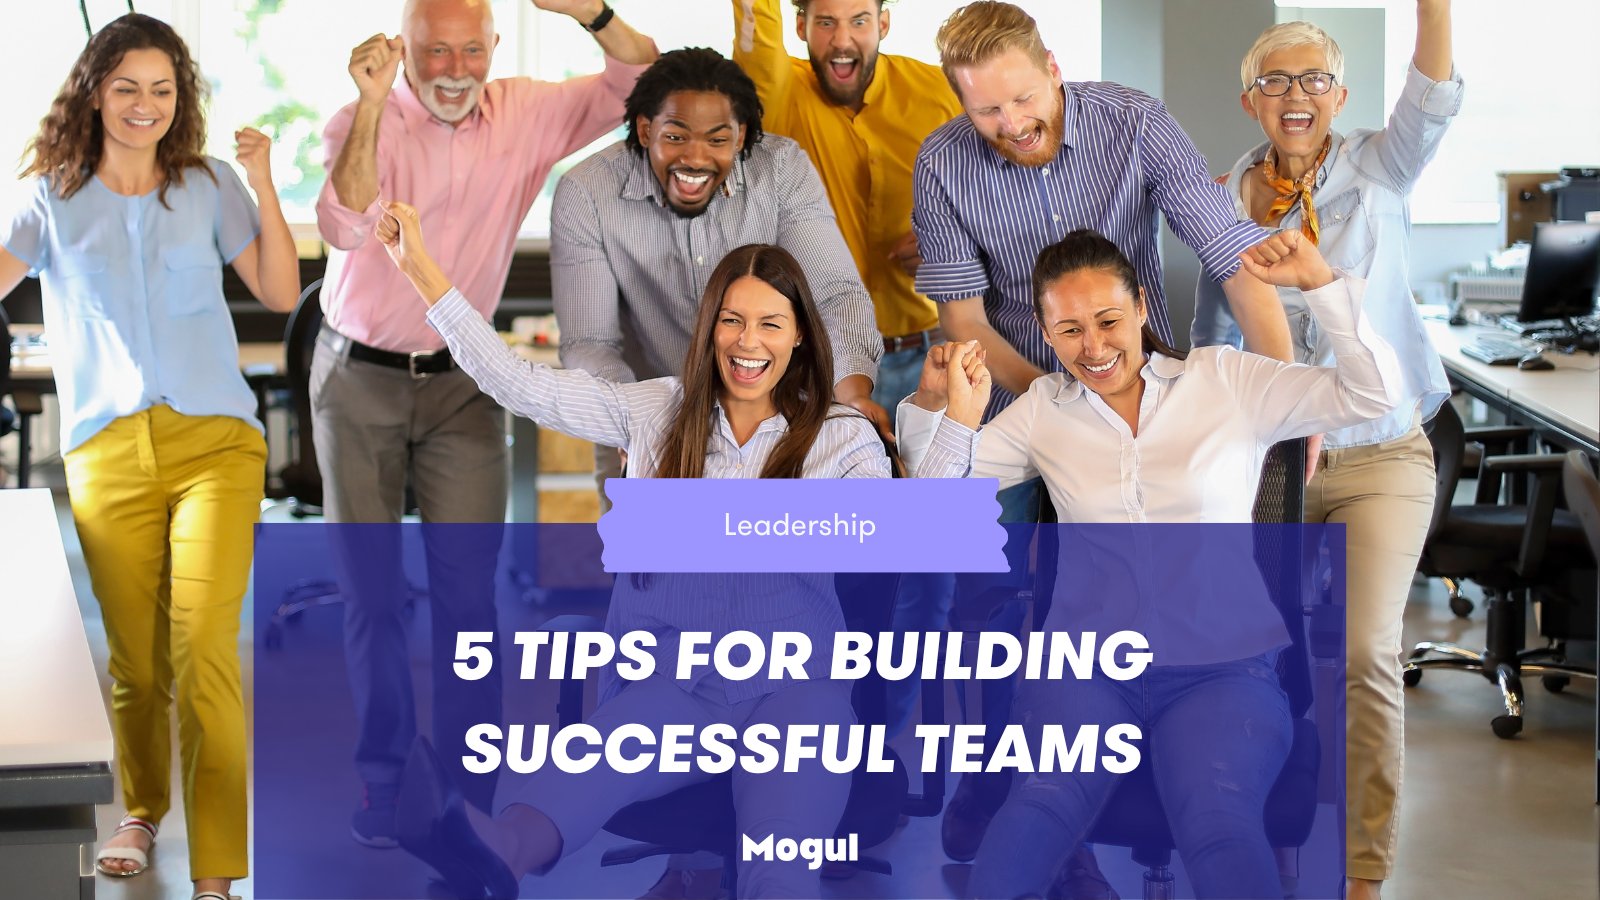 5 Tips for Building Successful Teams